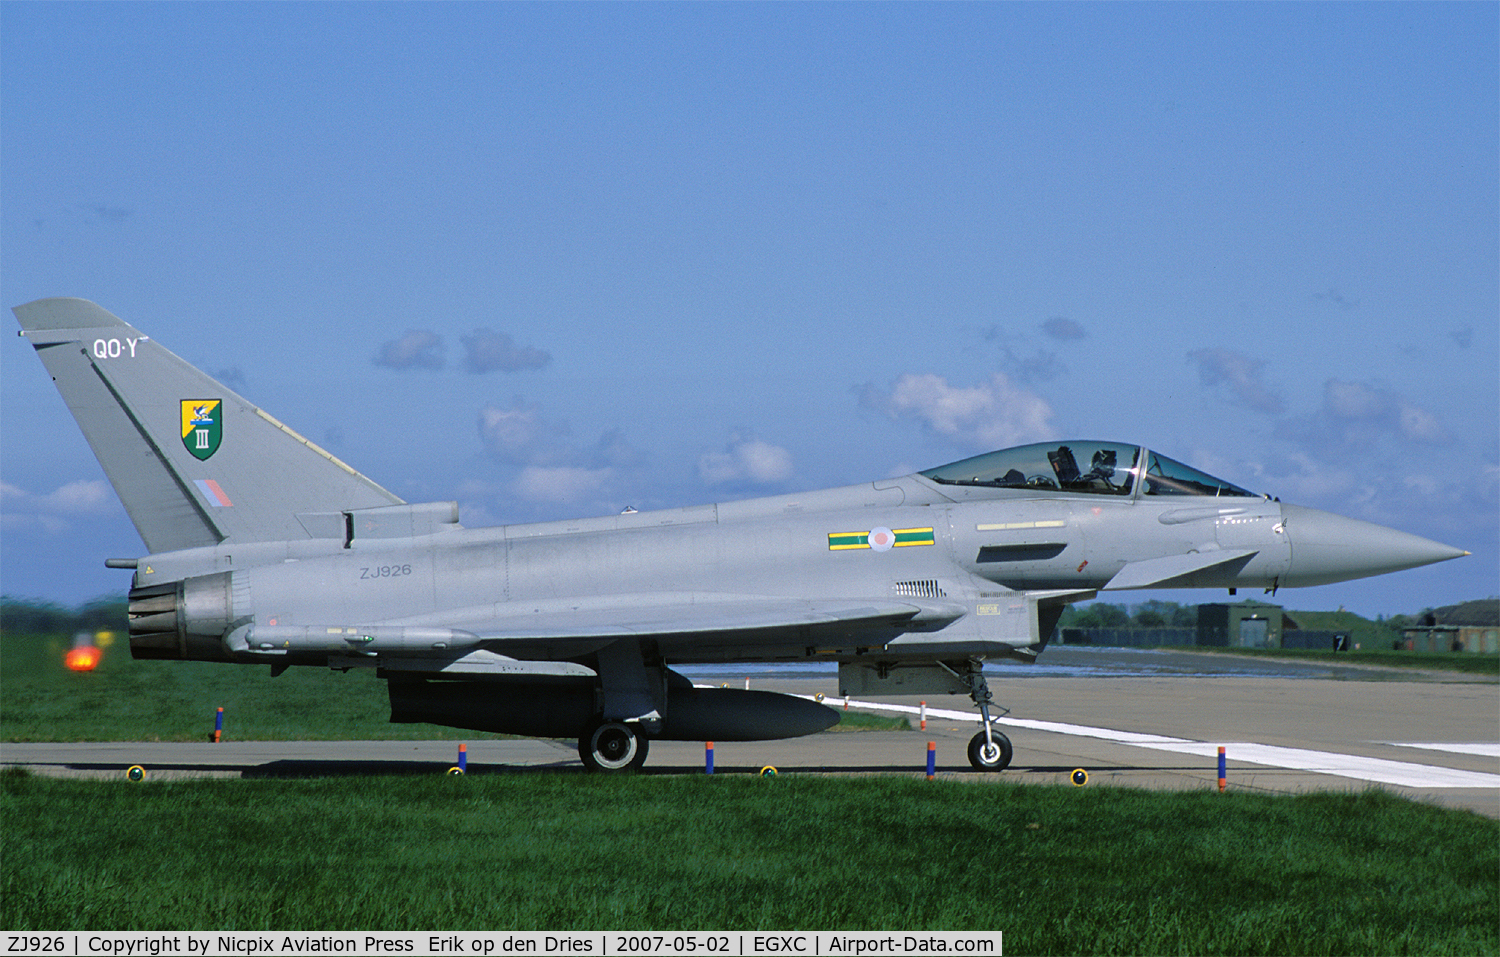 ZJ926, 2006 Eurofighter EF-2000 Typhoon F2 C/N 0083/BS017, RAF Typhoon F.2 ZJ926/QO-Y is assigned to no. 3 sqn, RAF, and is seen here at its' homebase, RAF Coningsby.